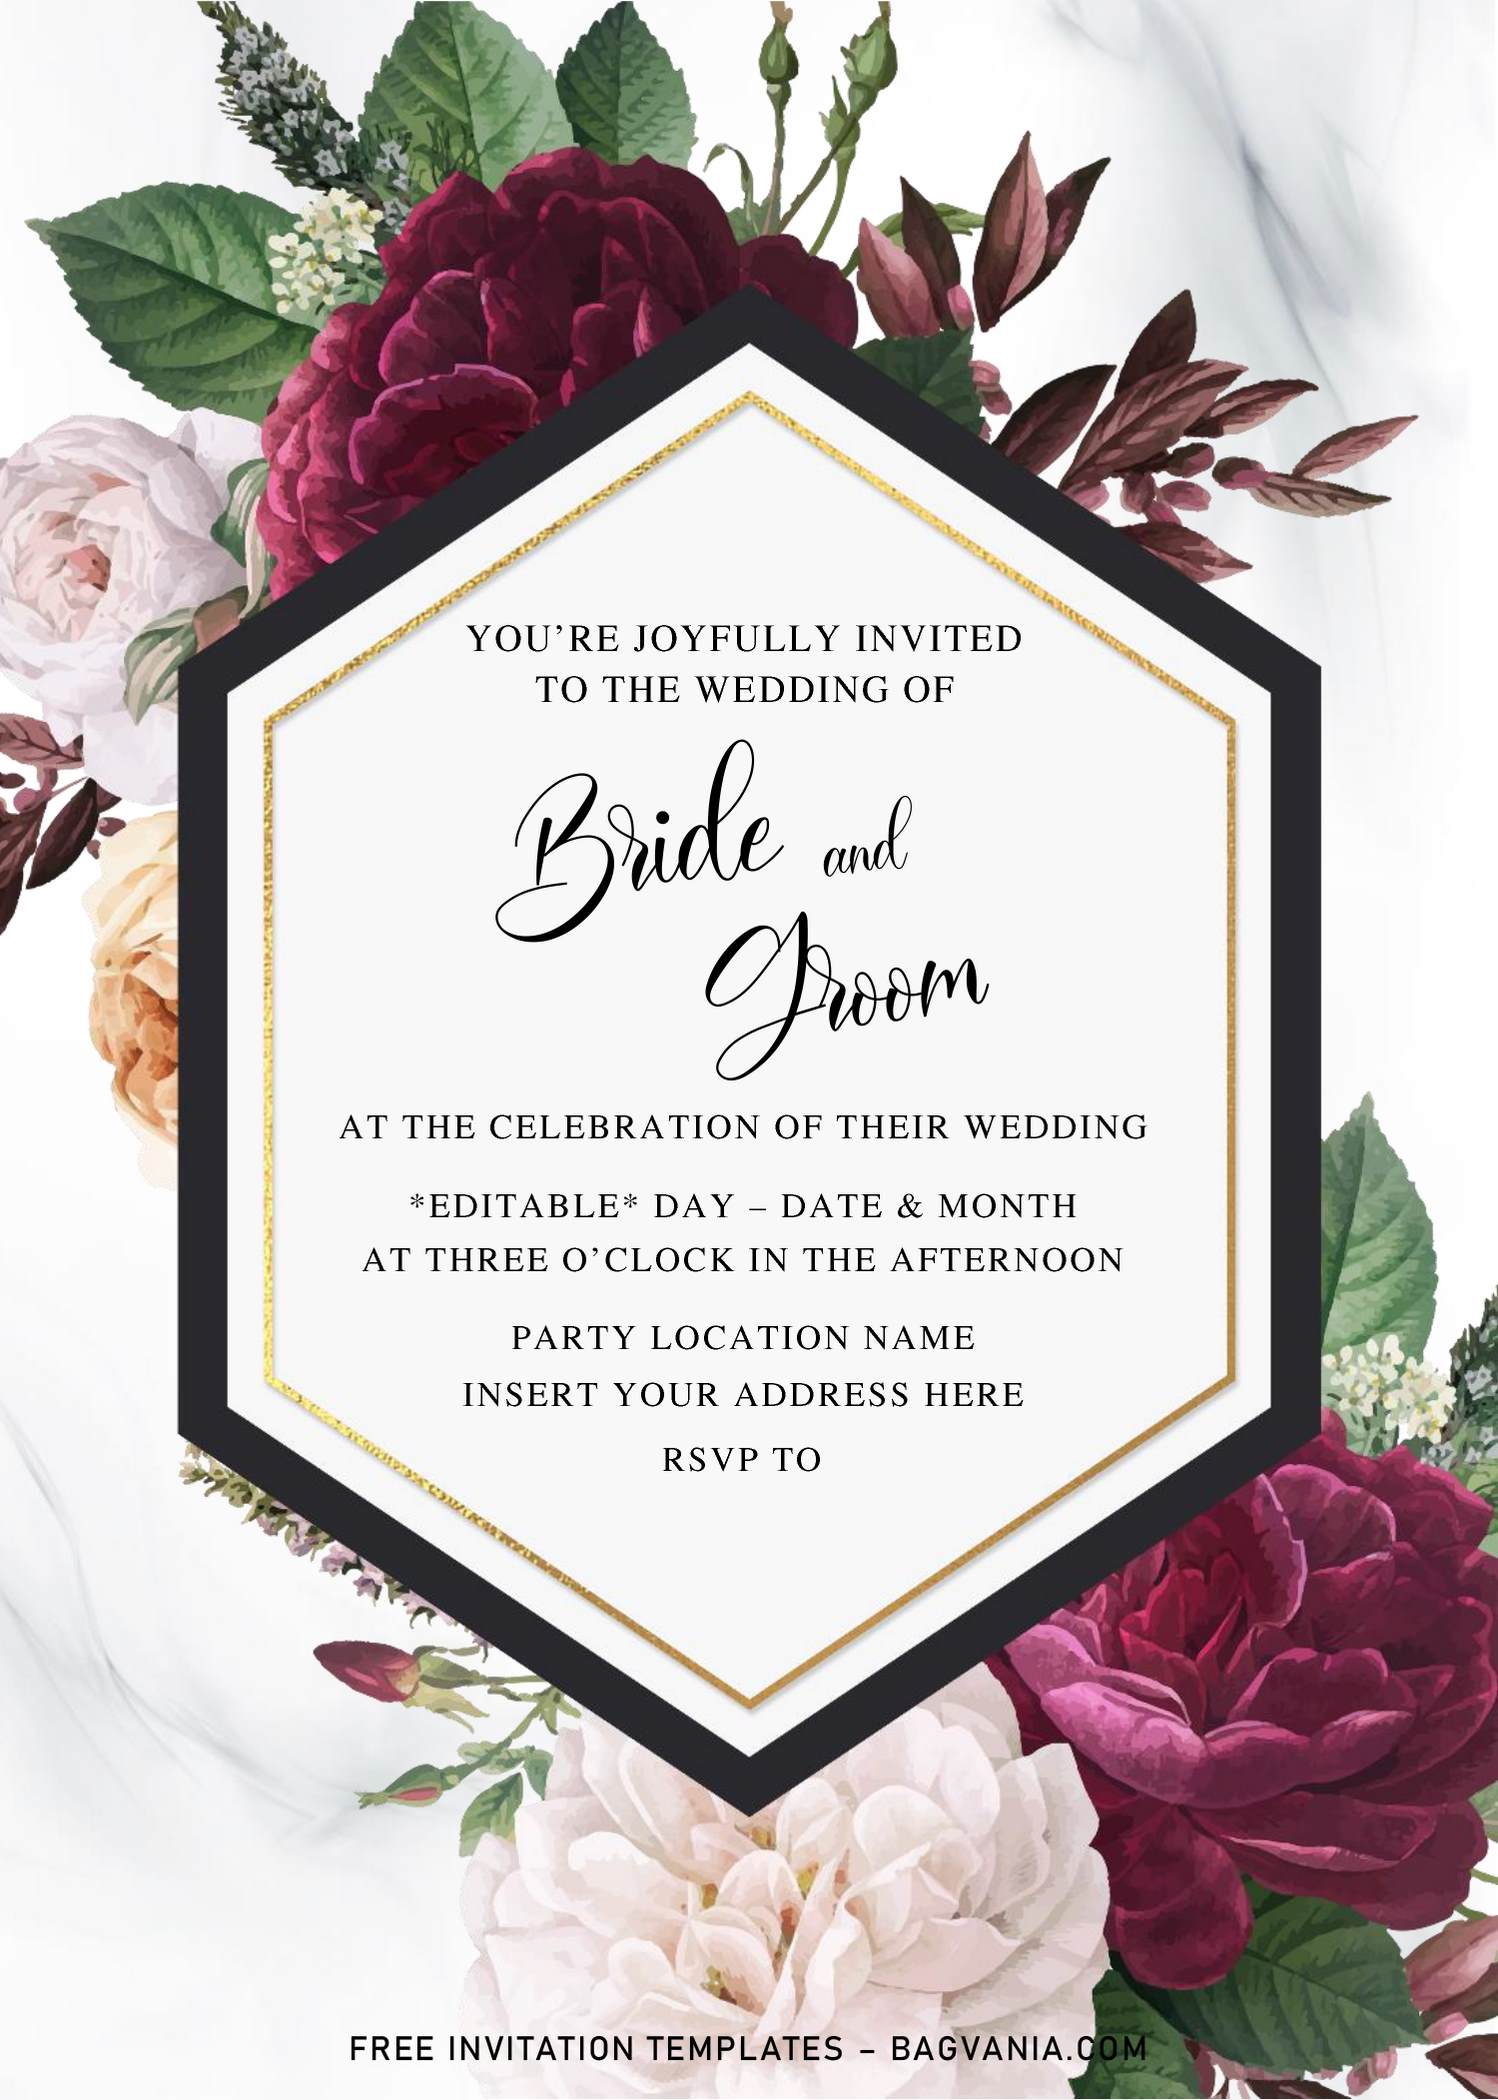 Free Burgundy Floral Wedding Invitation Templates For Word | FREE ...